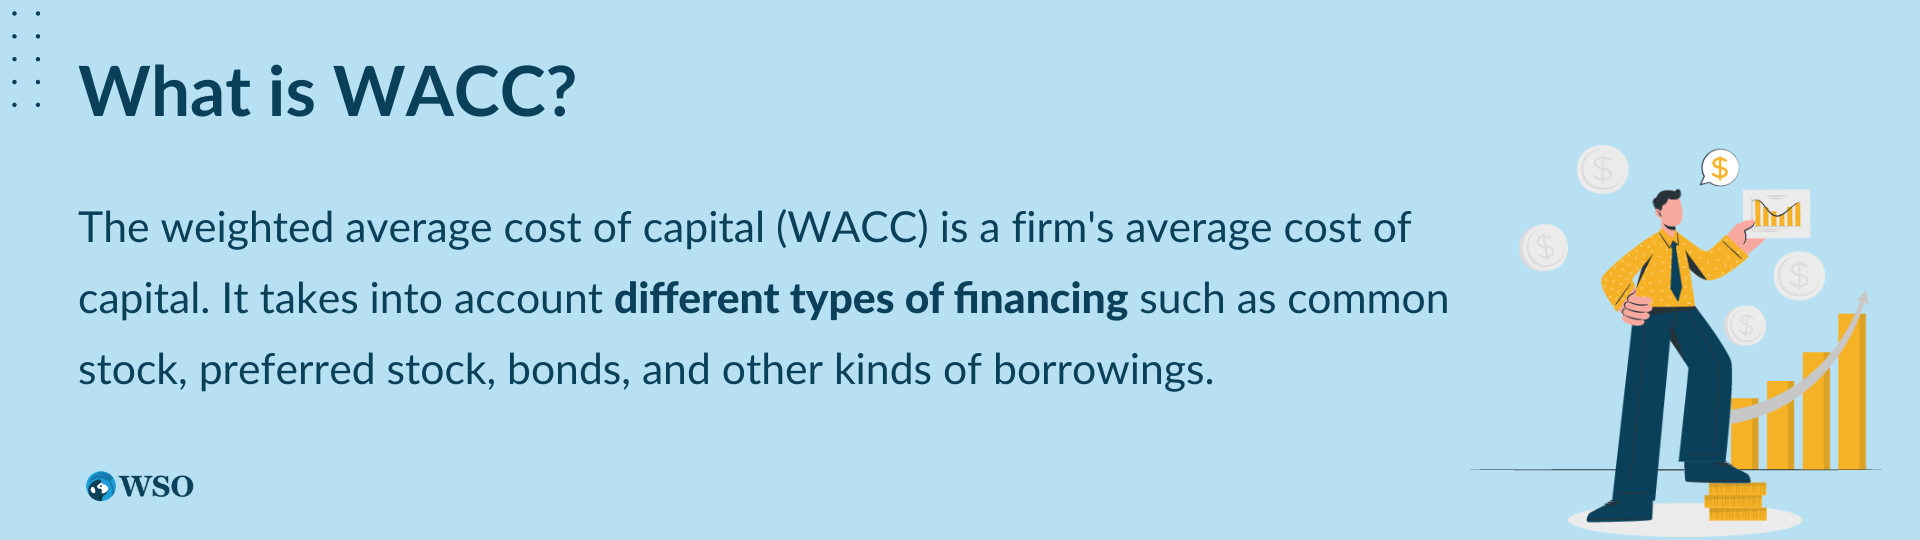 What is WACC?